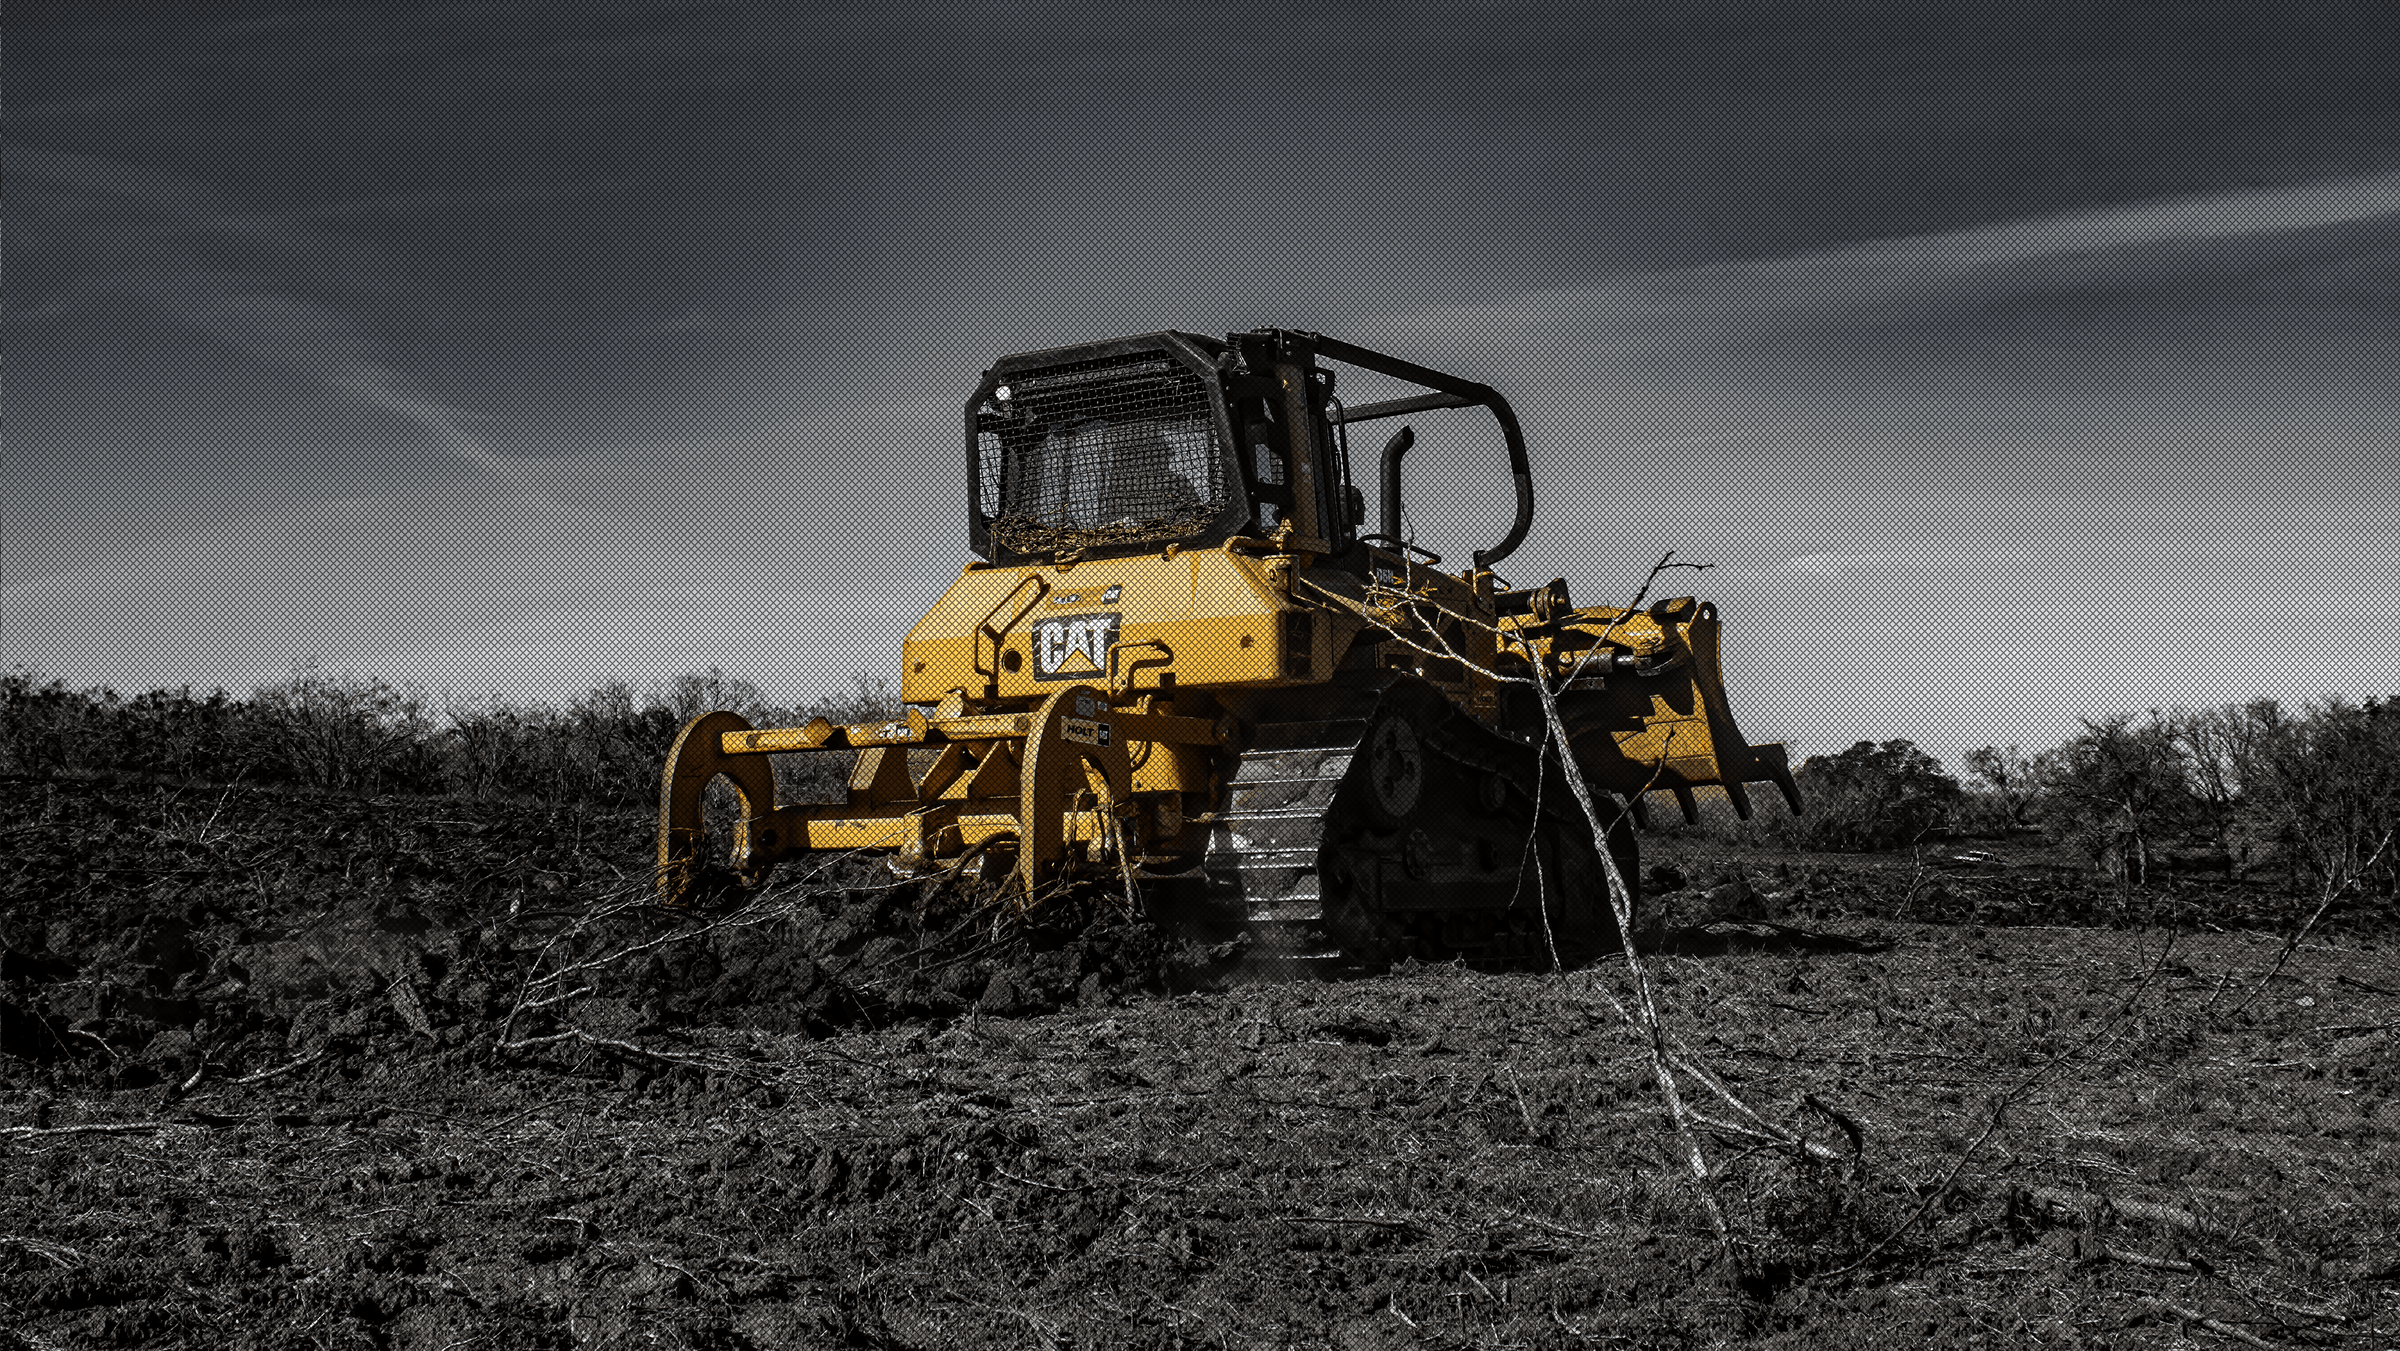 butlerwood land clearing services, butlerwood land clearing, professional land clearing services, butlerwood premium land clearing equipment, butlerwood caterpillar equipment land clearing, land clearing professionals butlerwood